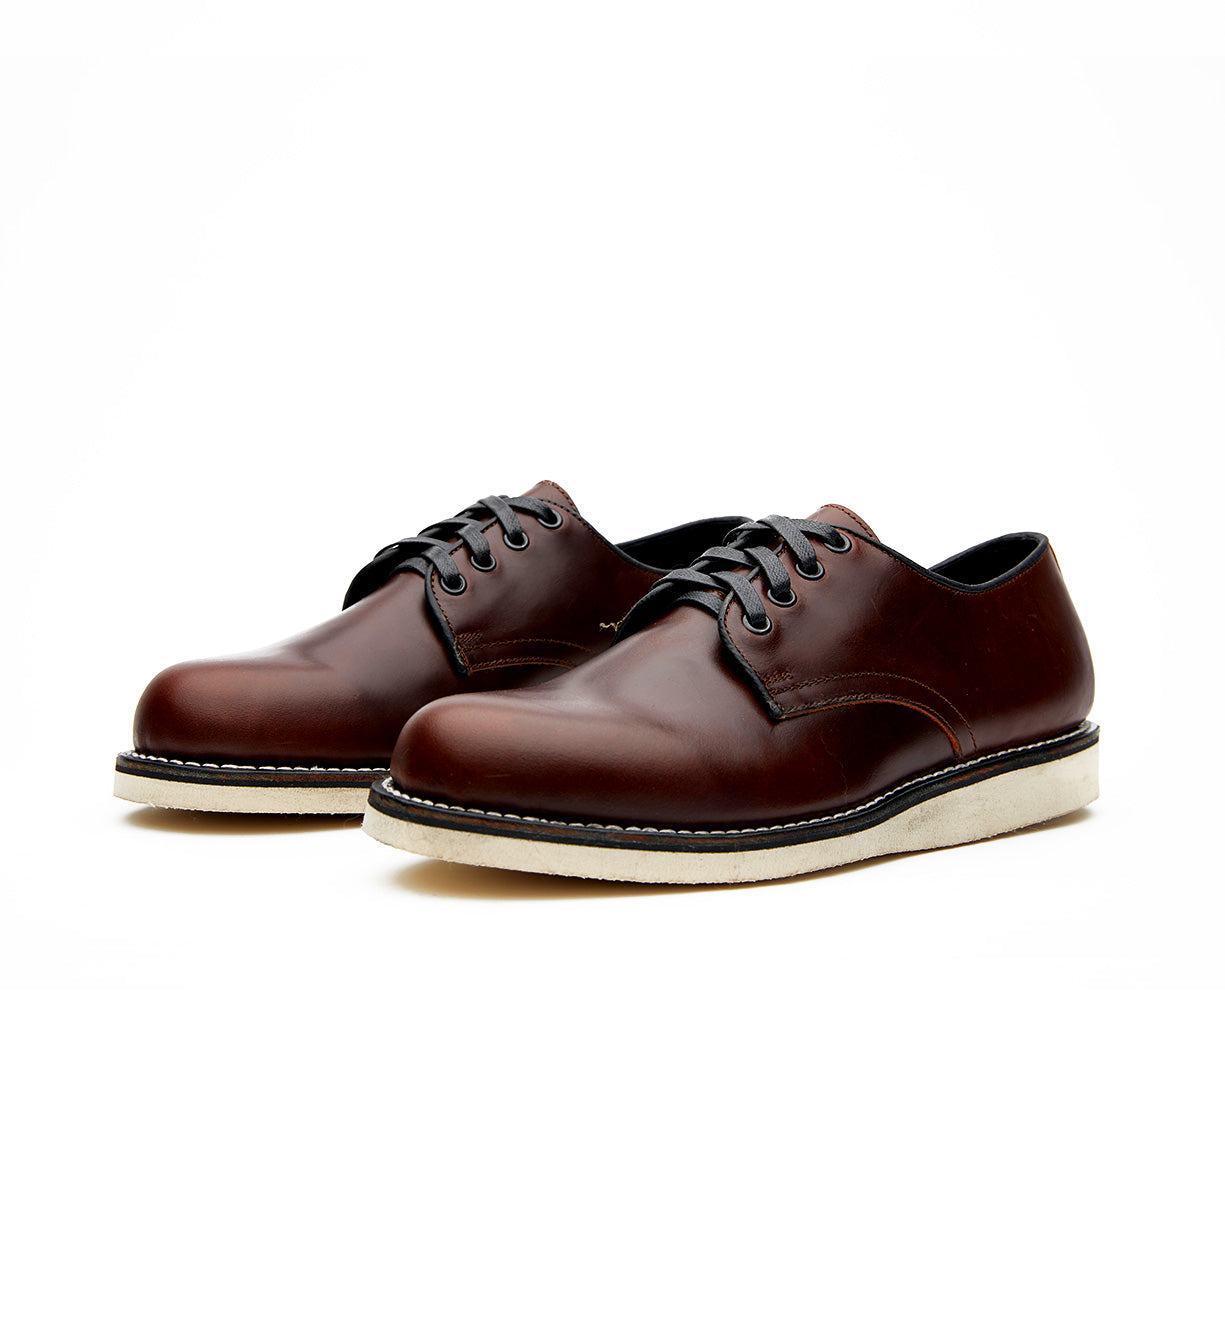 A pair of brown Michael II oxford shoes featuring a Vibram wedge outsole on a white background by Broken Homme.